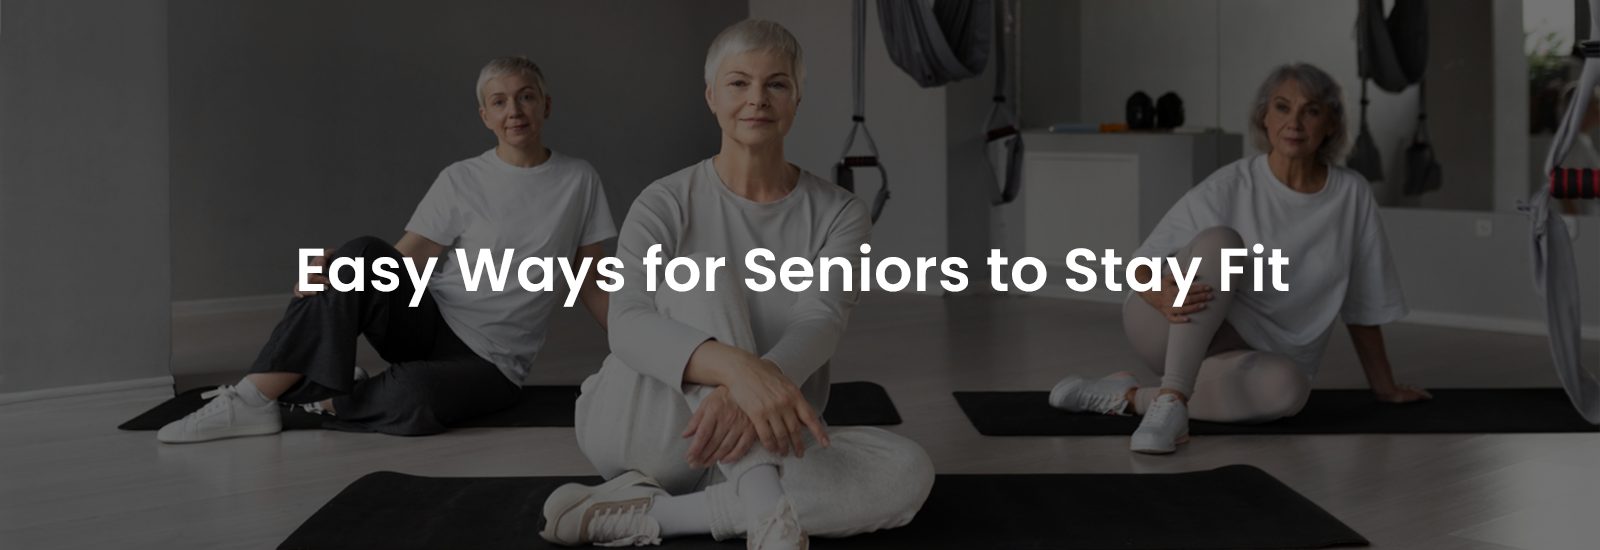 Easy Ways for Seniors to Stay Fit